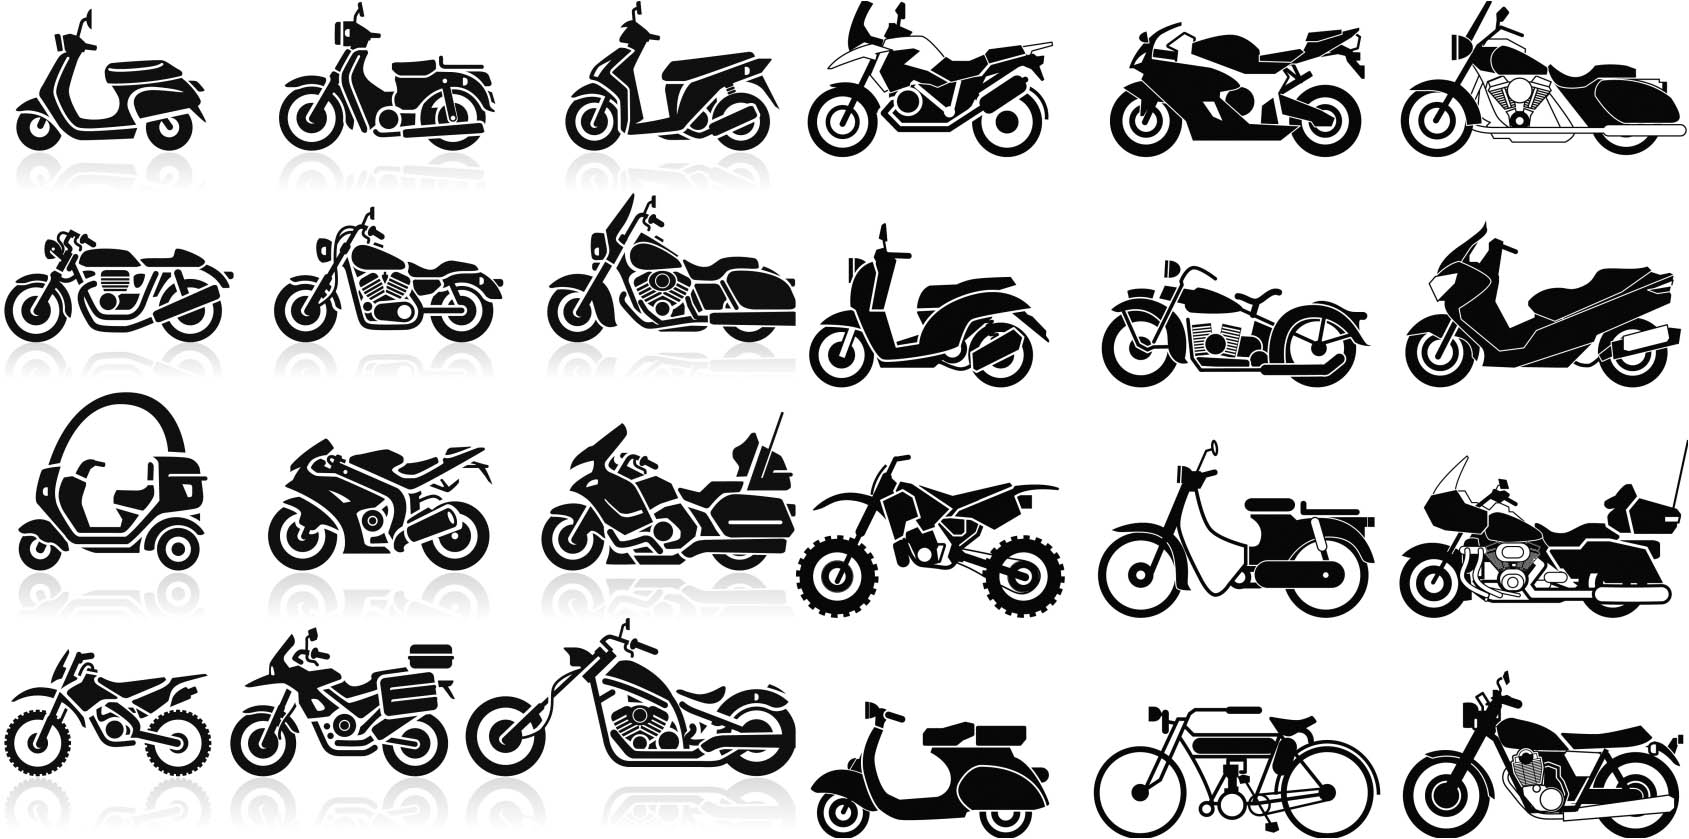 All type Motorcycles silhouettes